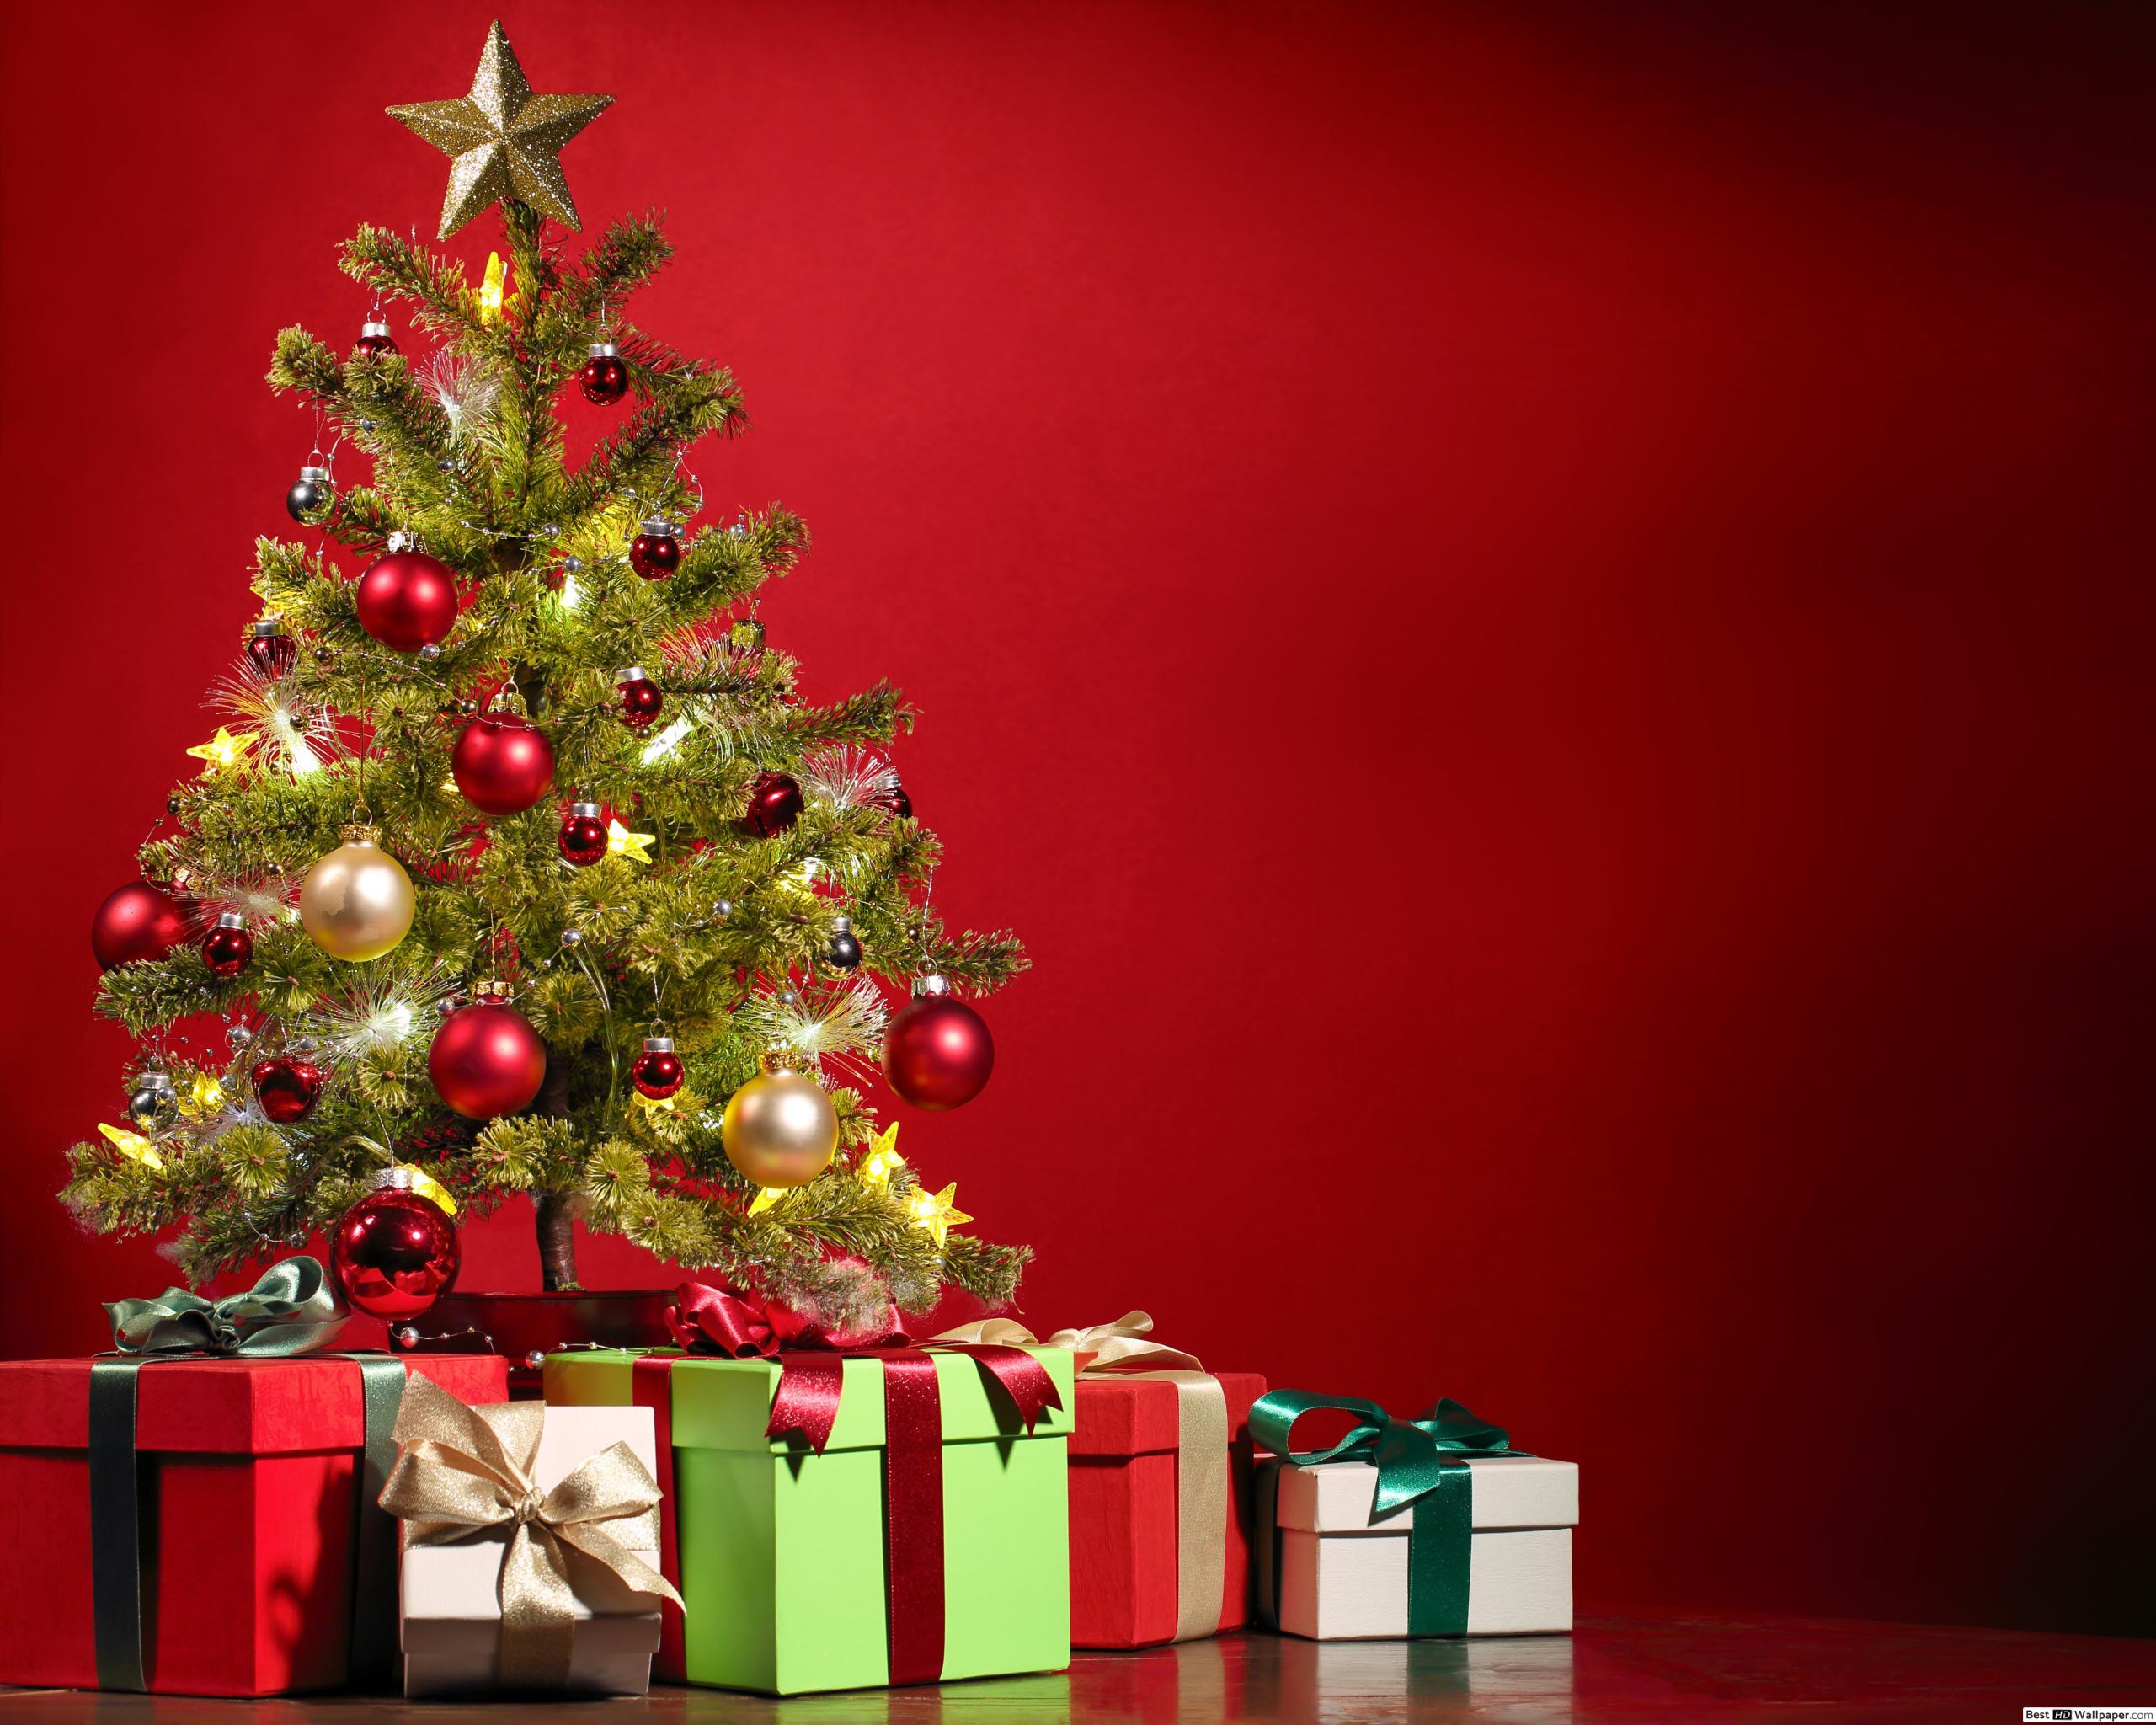 Christmas pine and gift boxes HD wallpaper download